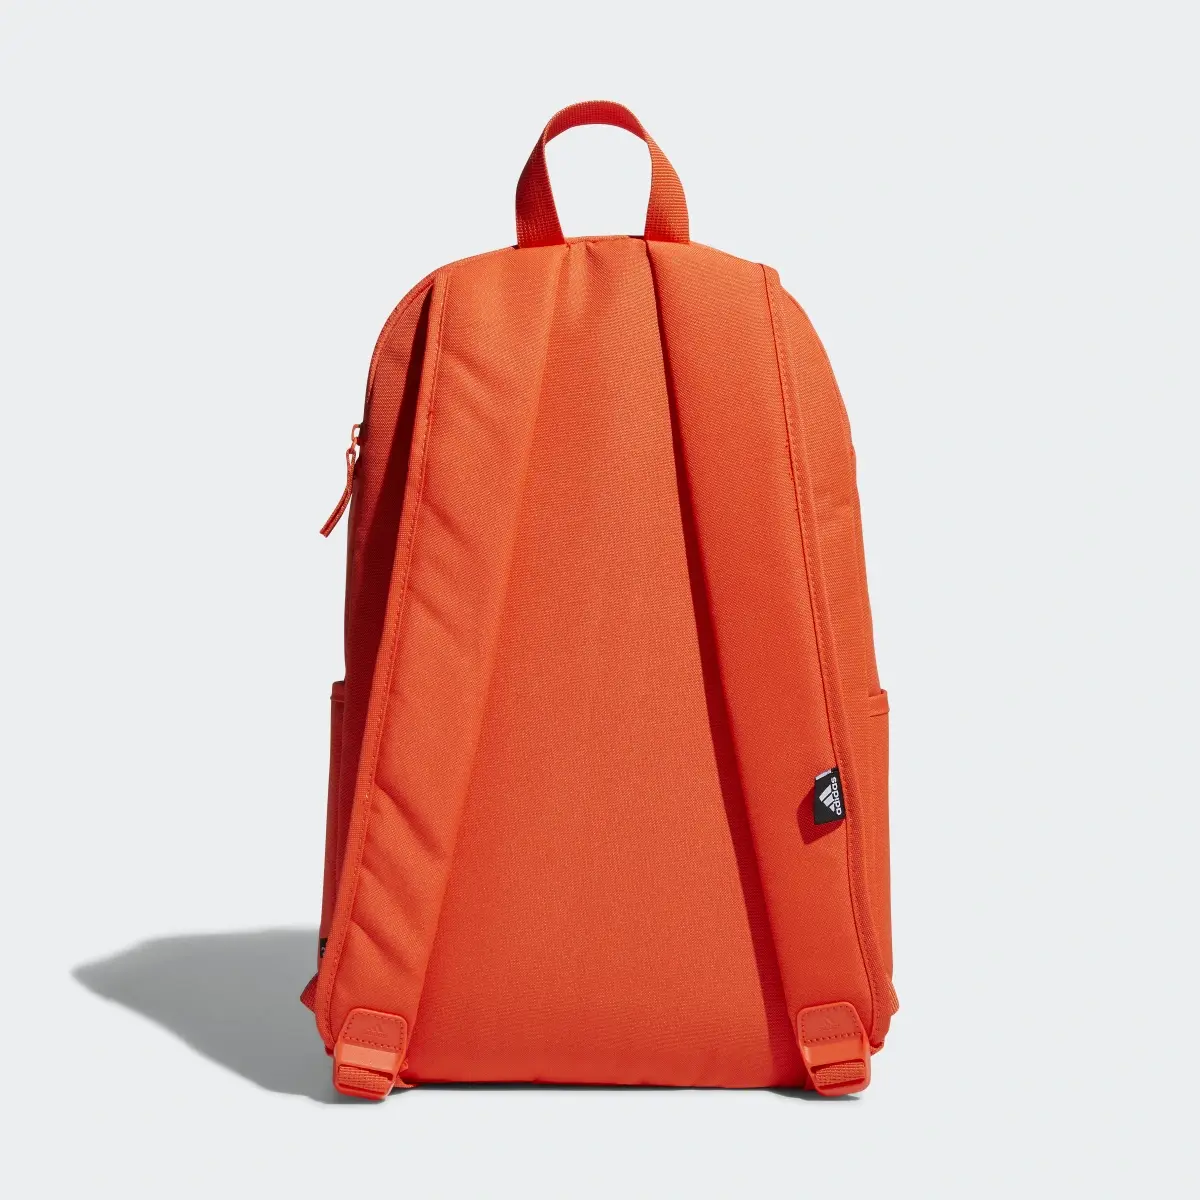 Adidas CL Classic Backpack. 3